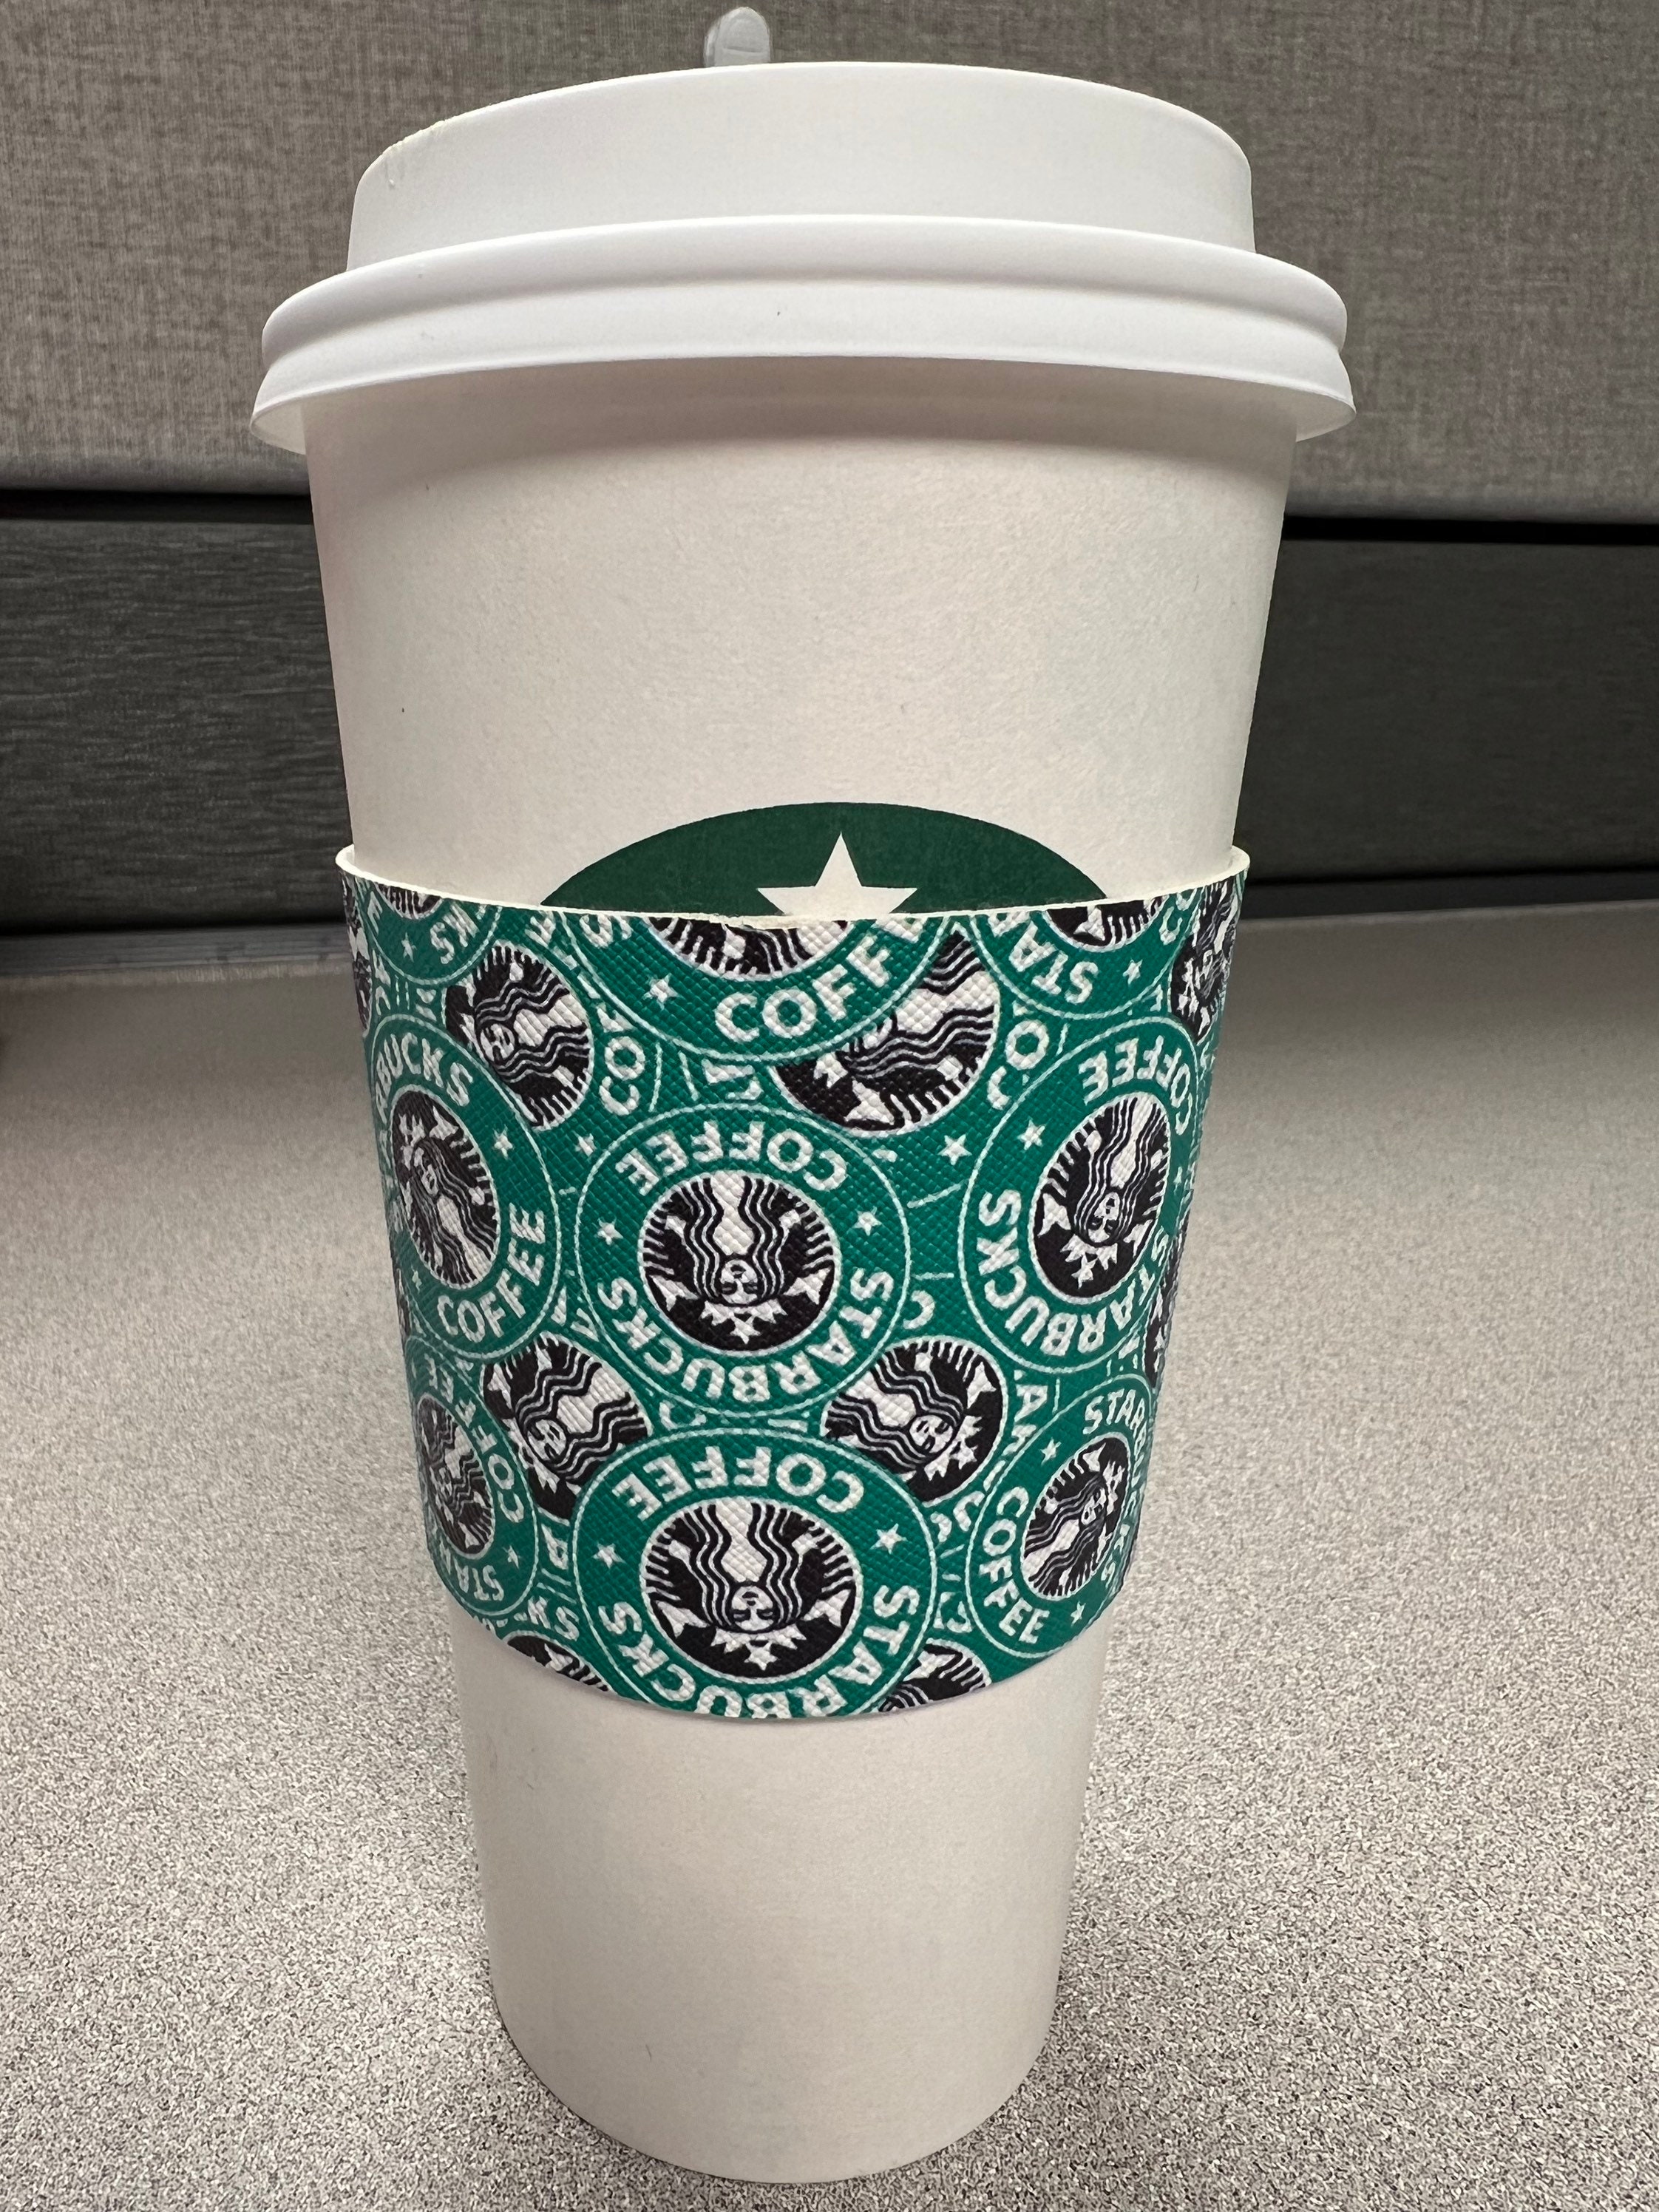 . Starbucks Coffee Cups, Sleeves and Lids